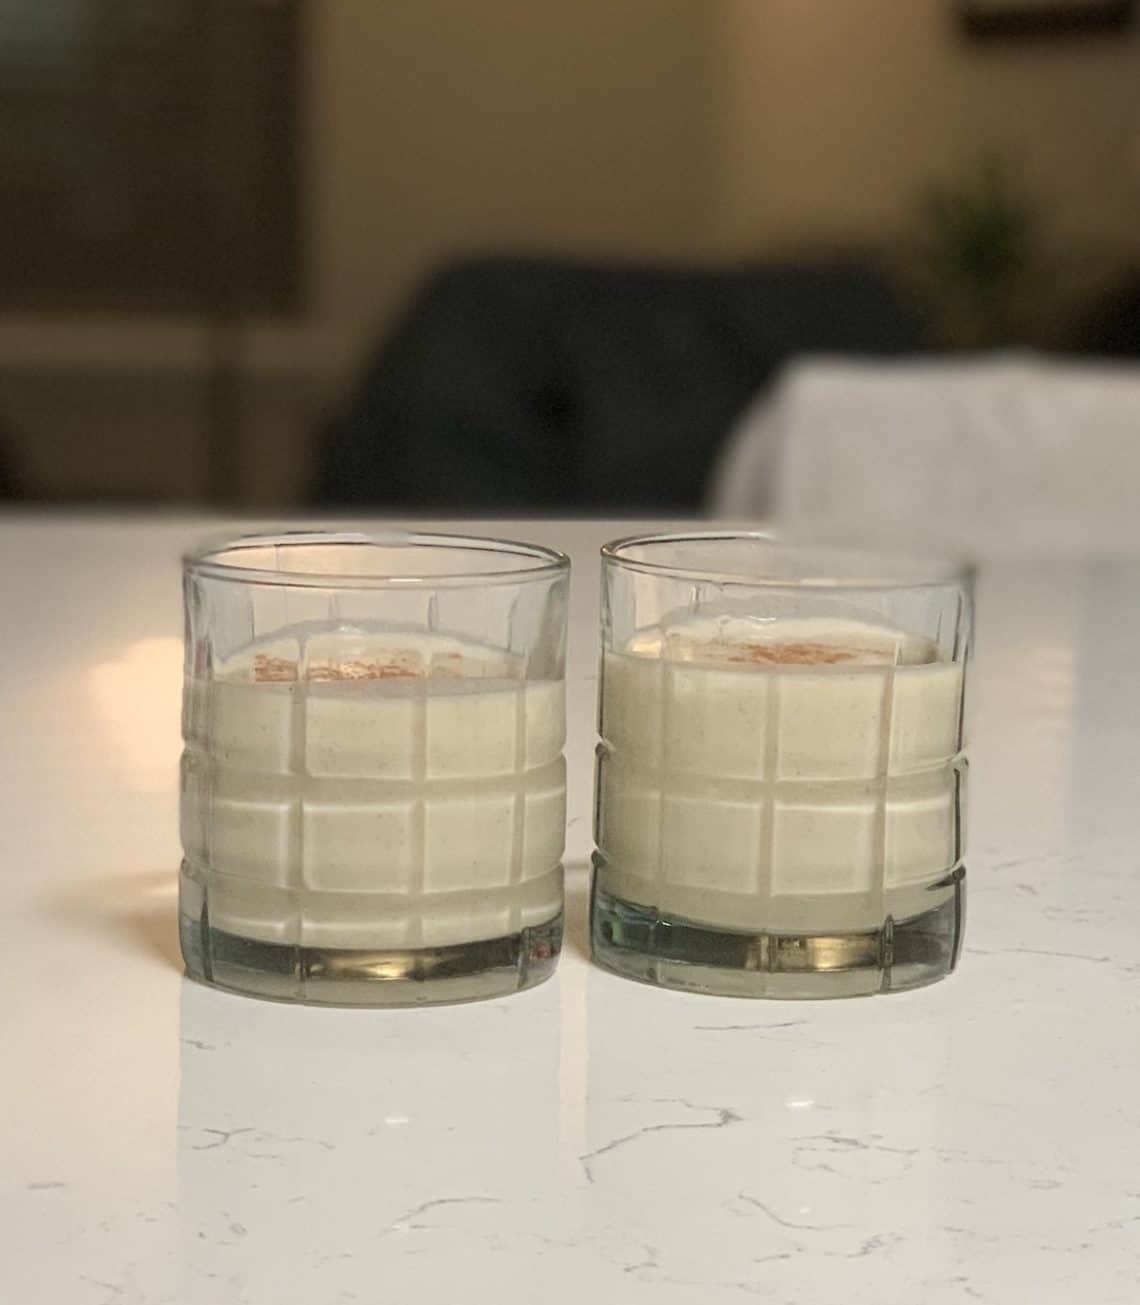 Two glasses of Authentic Puerto Rican Coquito garnished with cinnamon